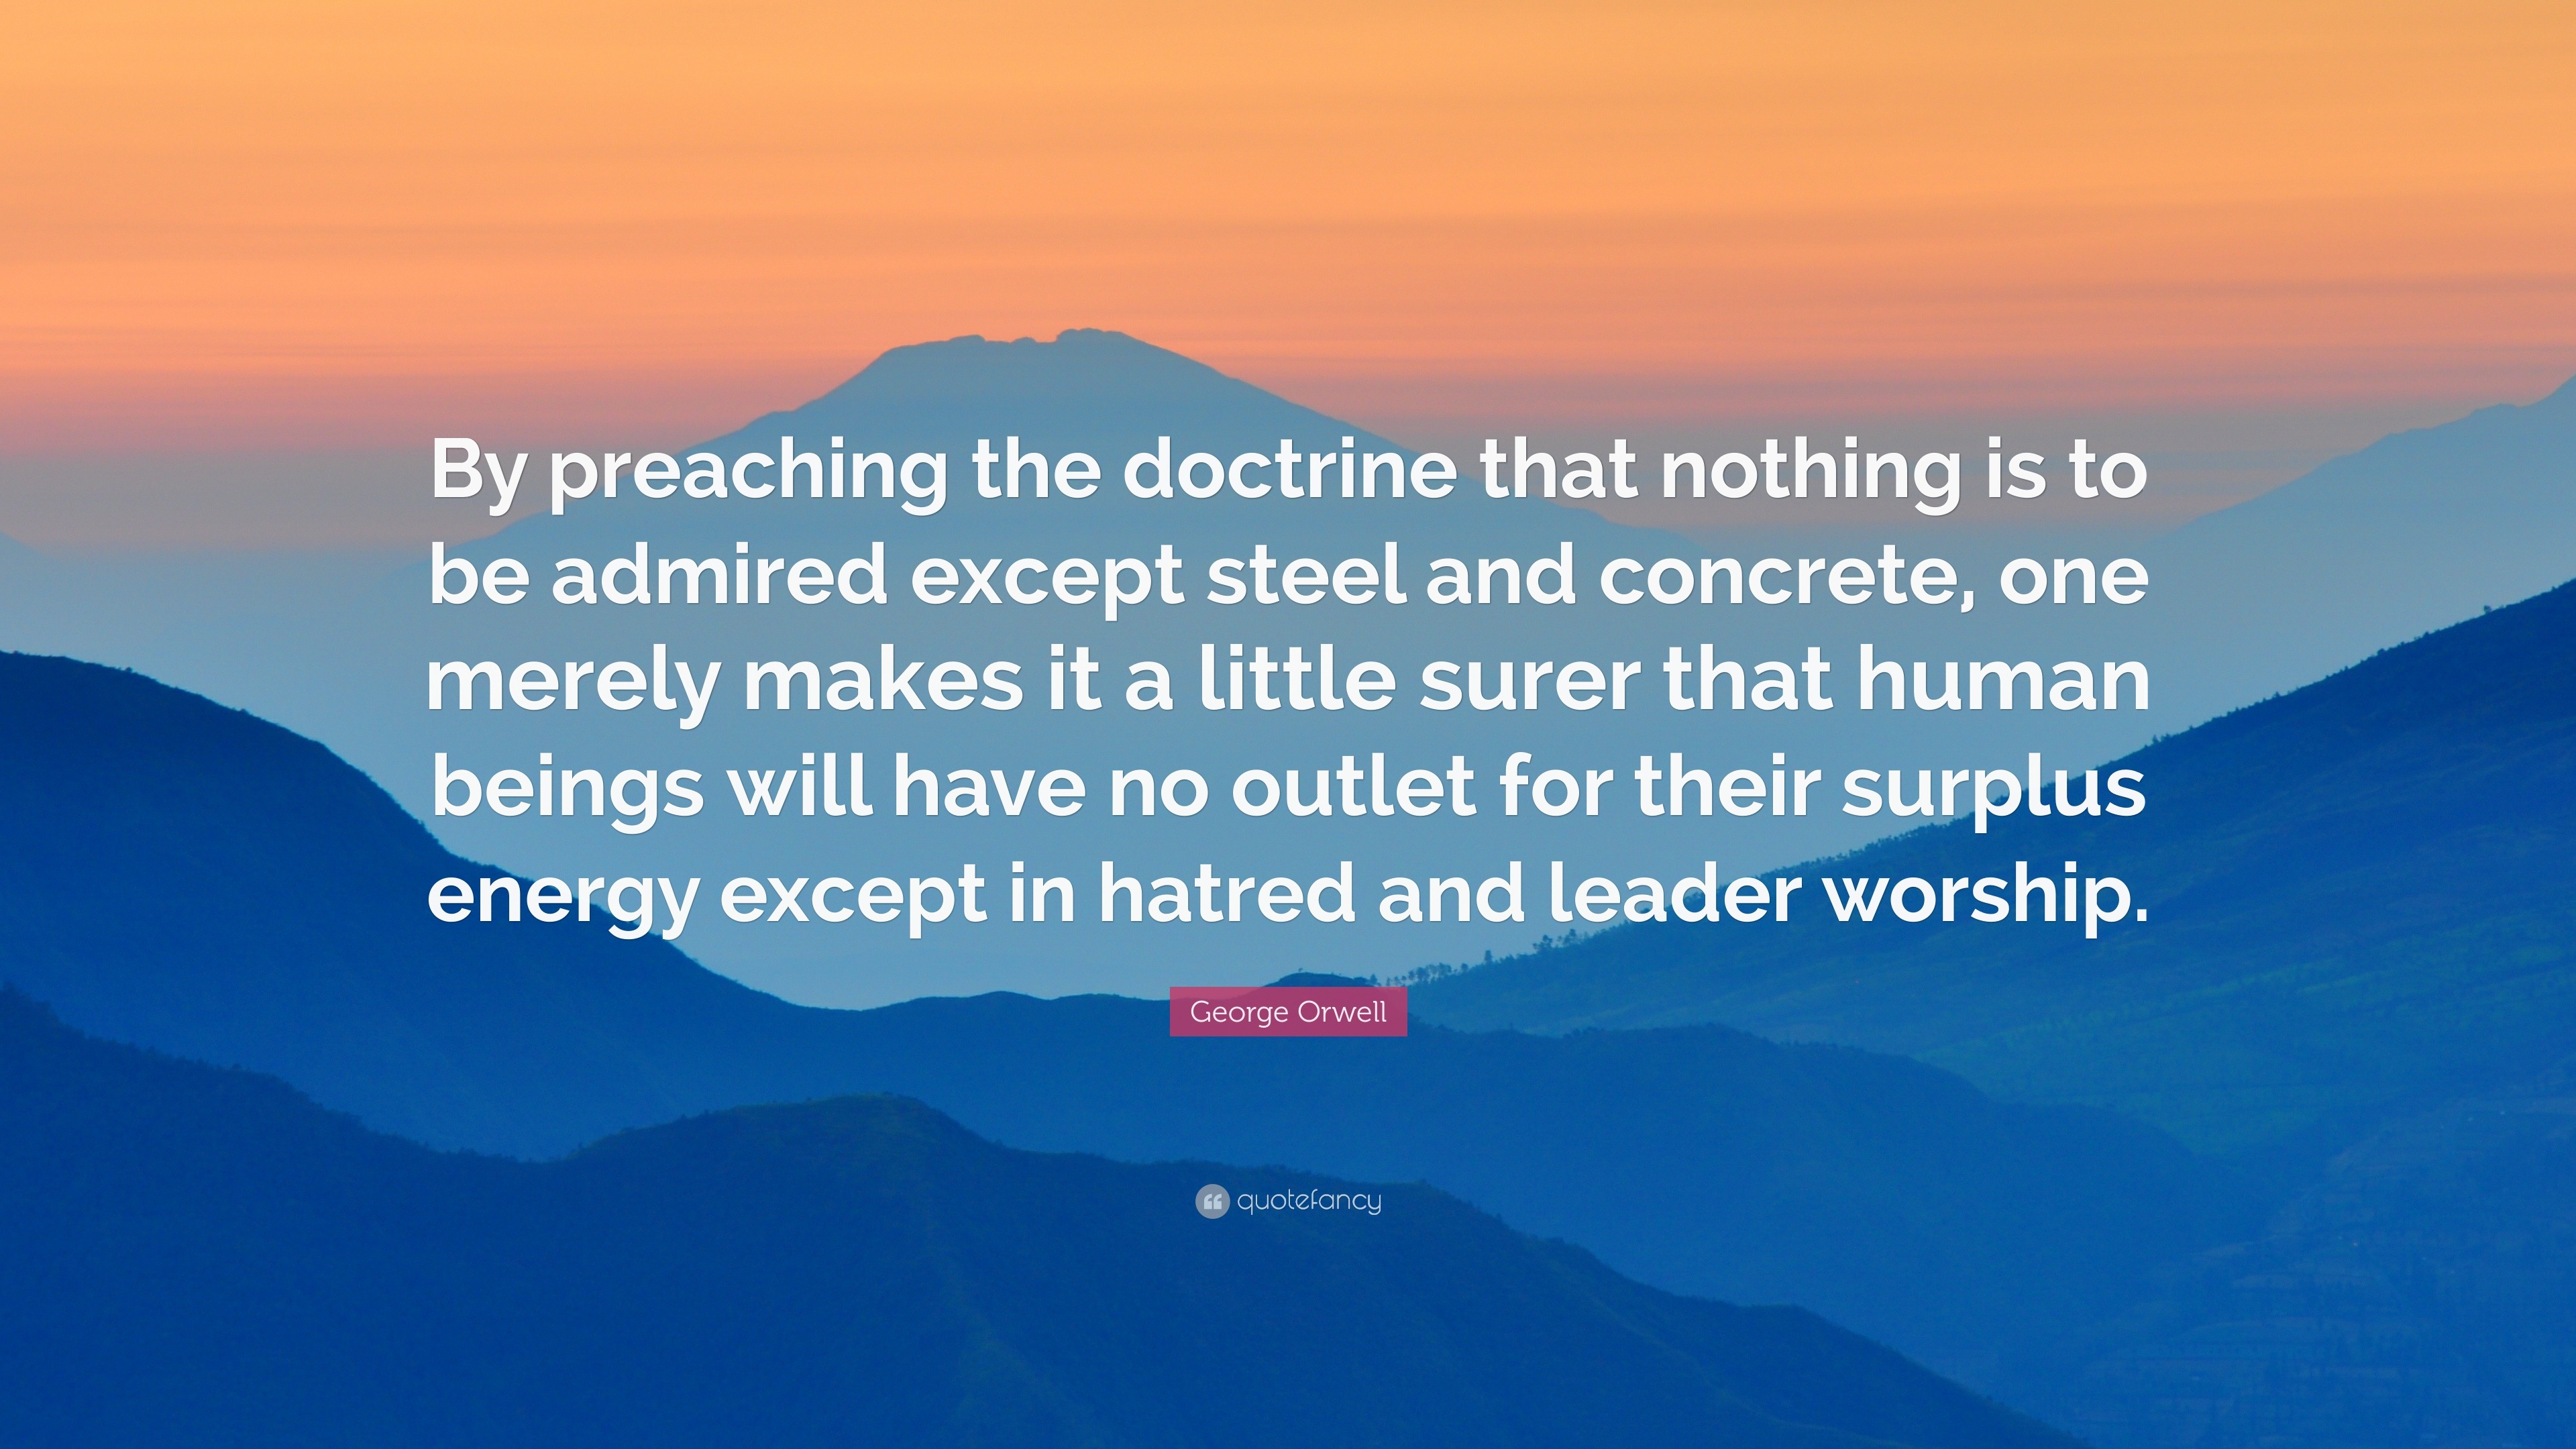 George Orwell Quote: “By preaching the doctrine that nothing is to be ...